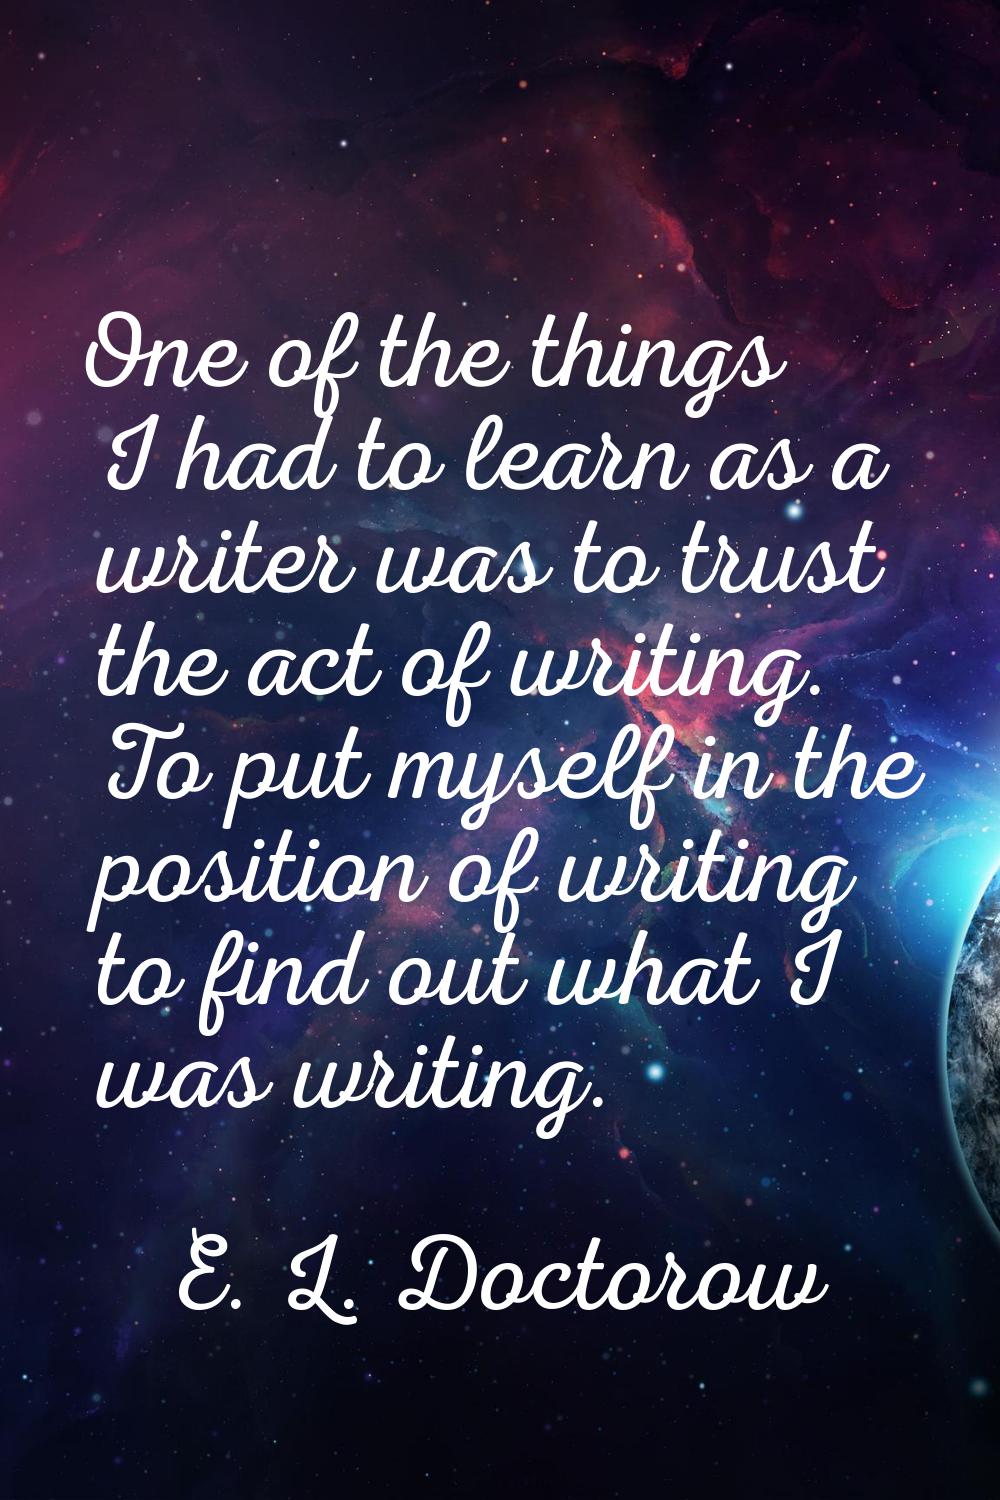 One of the things I had to learn as a writer was to trust the act of writing. To put myself in the 